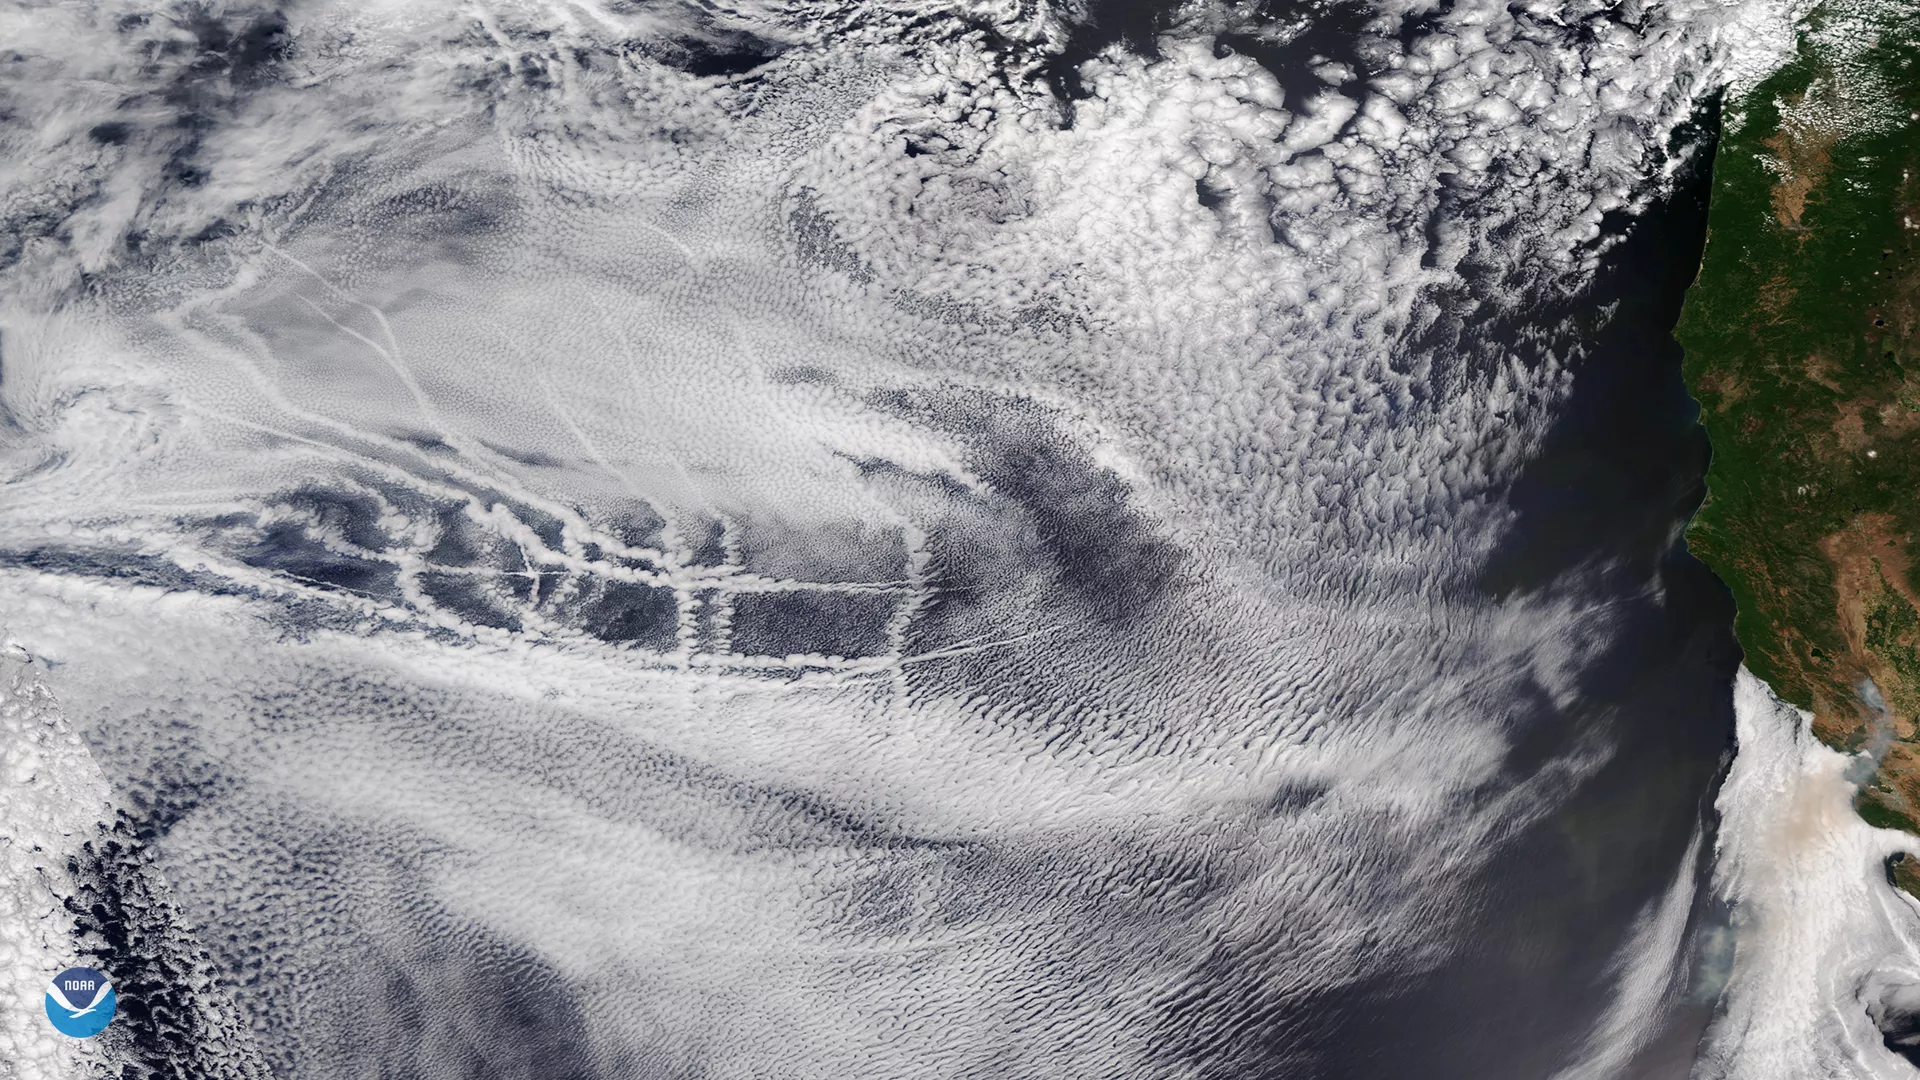 As cargo ships steam across the oceans, the tiny aerosol particles in their exhaust act as cloud nuclei, or seeds around which moisture in the atmosphere can condense